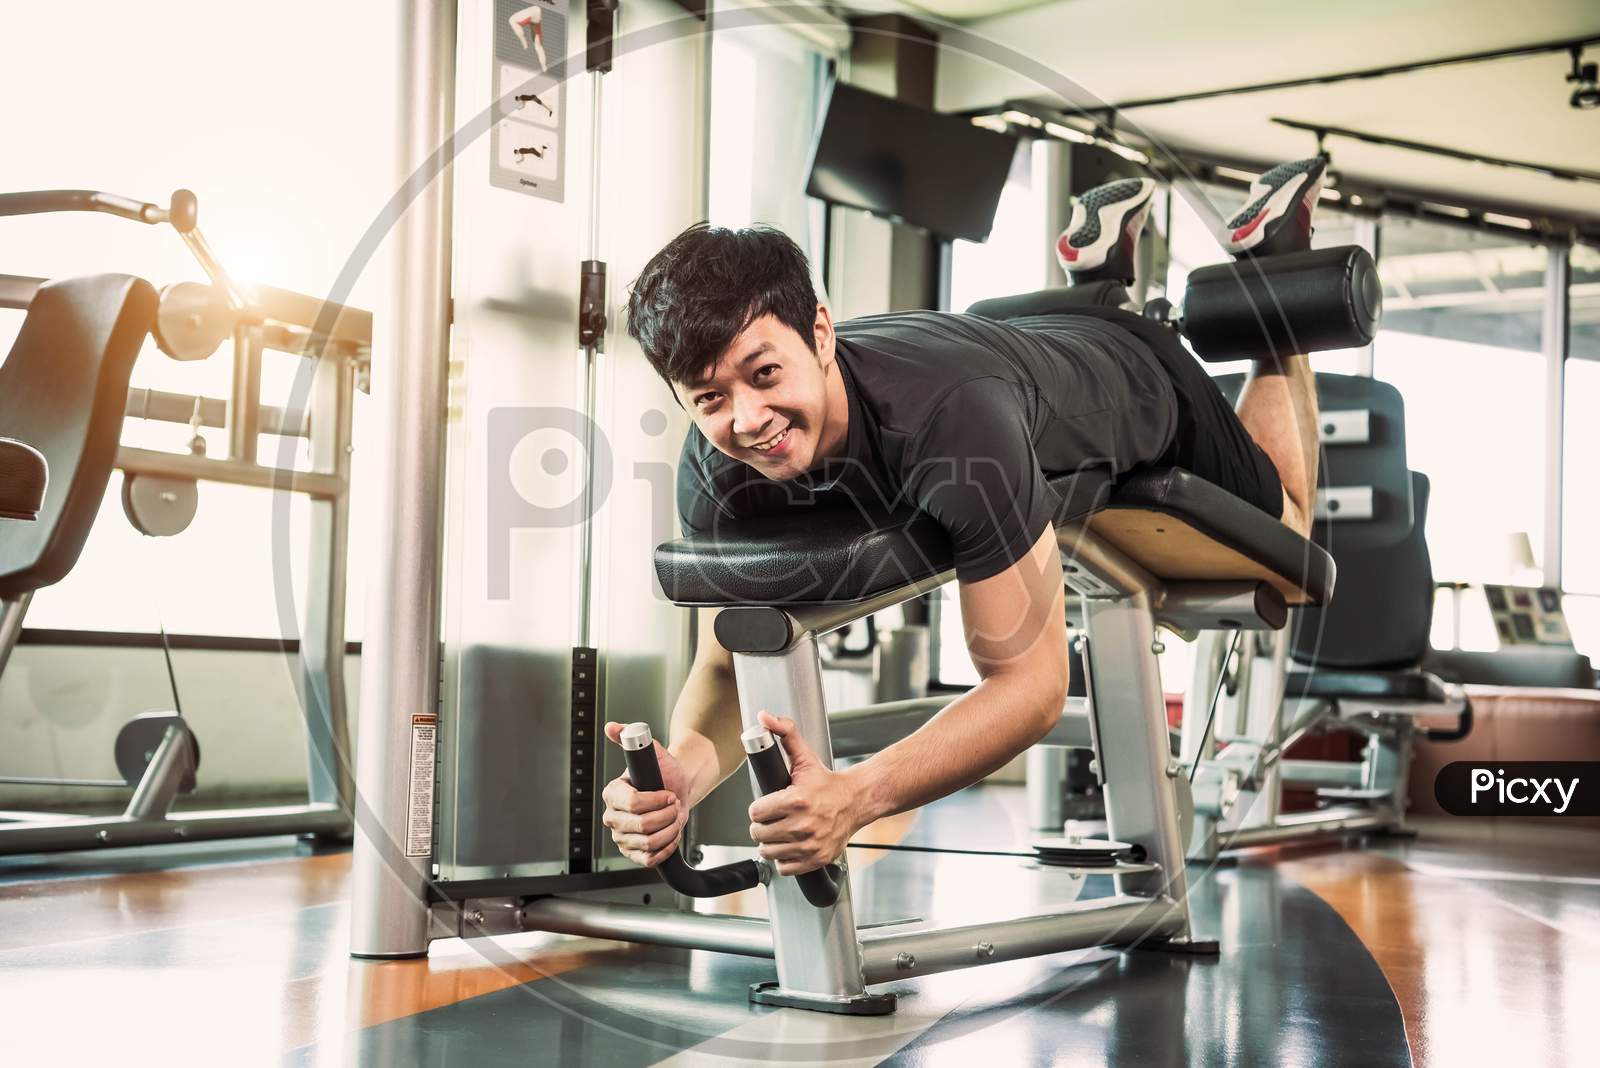 Asian Sport Man Stretching And Lifting Weight By Two Legs When Facing Down For Stretching Muscle At Fitness Gym At Condominium Background. Sport And People Lifestyles Concept.